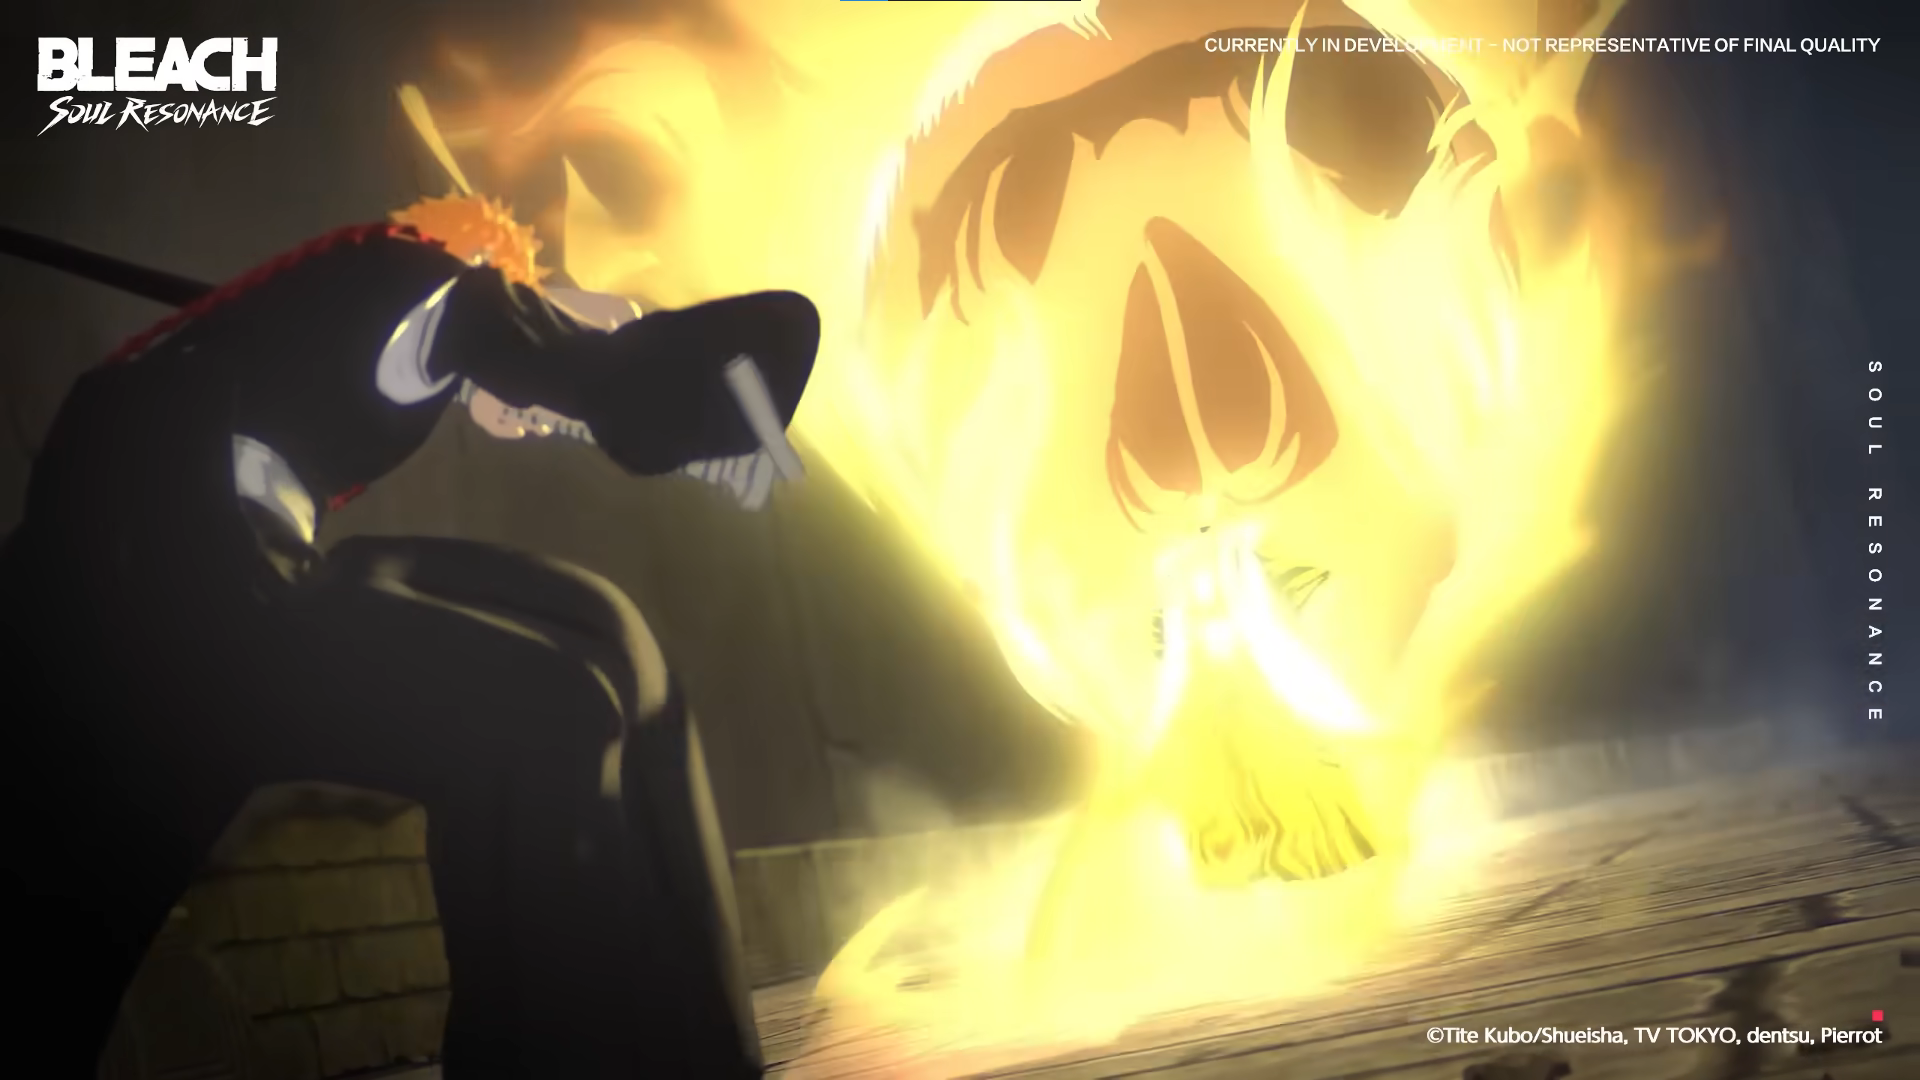 Bleach: Soul Resonance is a new action-RPG console game